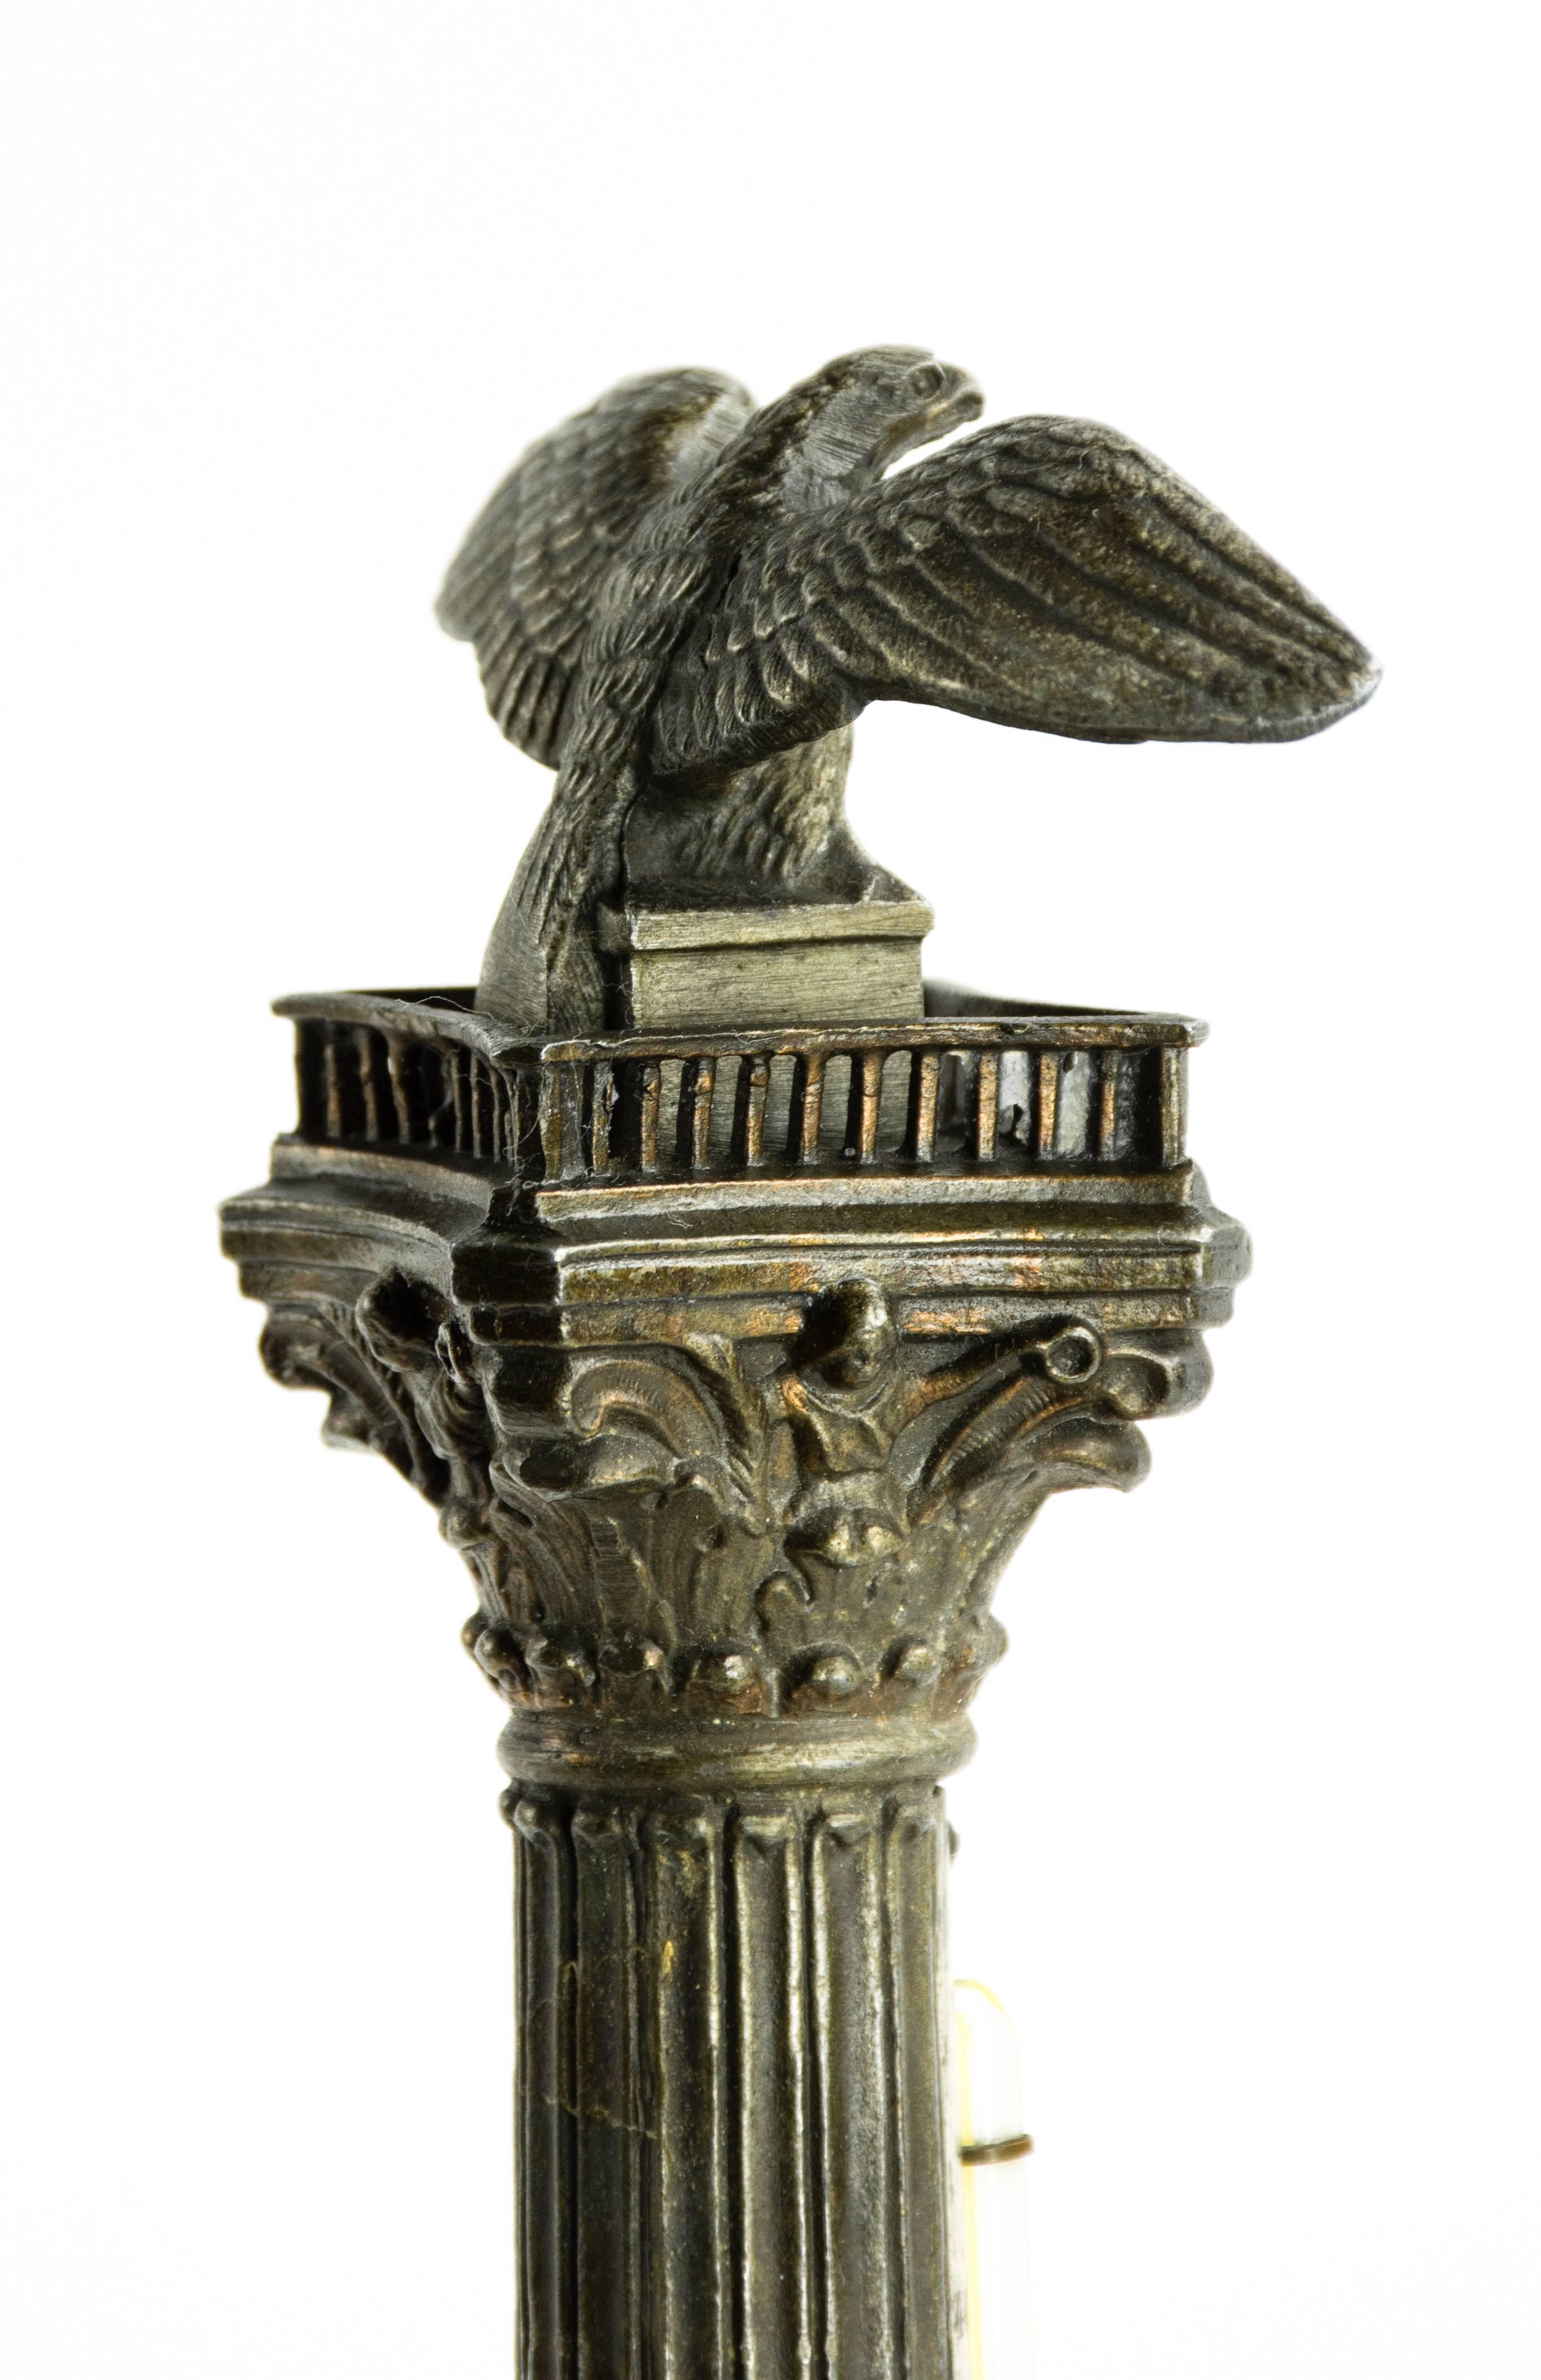 Scarce Invalidensaule Monument Model with Thermometer, circa 1854, Berlin For Sale 2